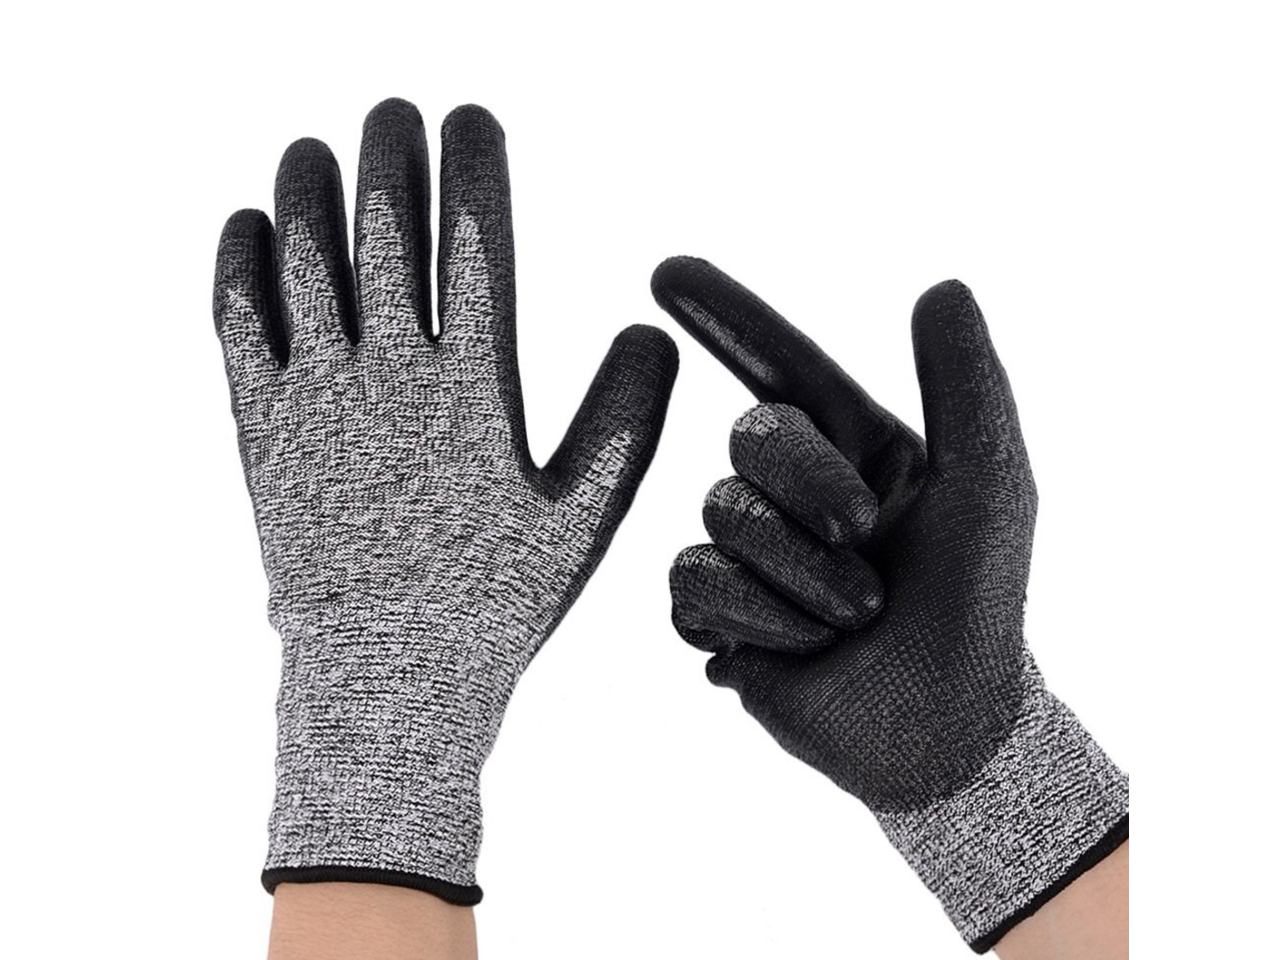 Cut Resistant Gloves Work Gloves Level 5 Hand Protection Gloves for ...